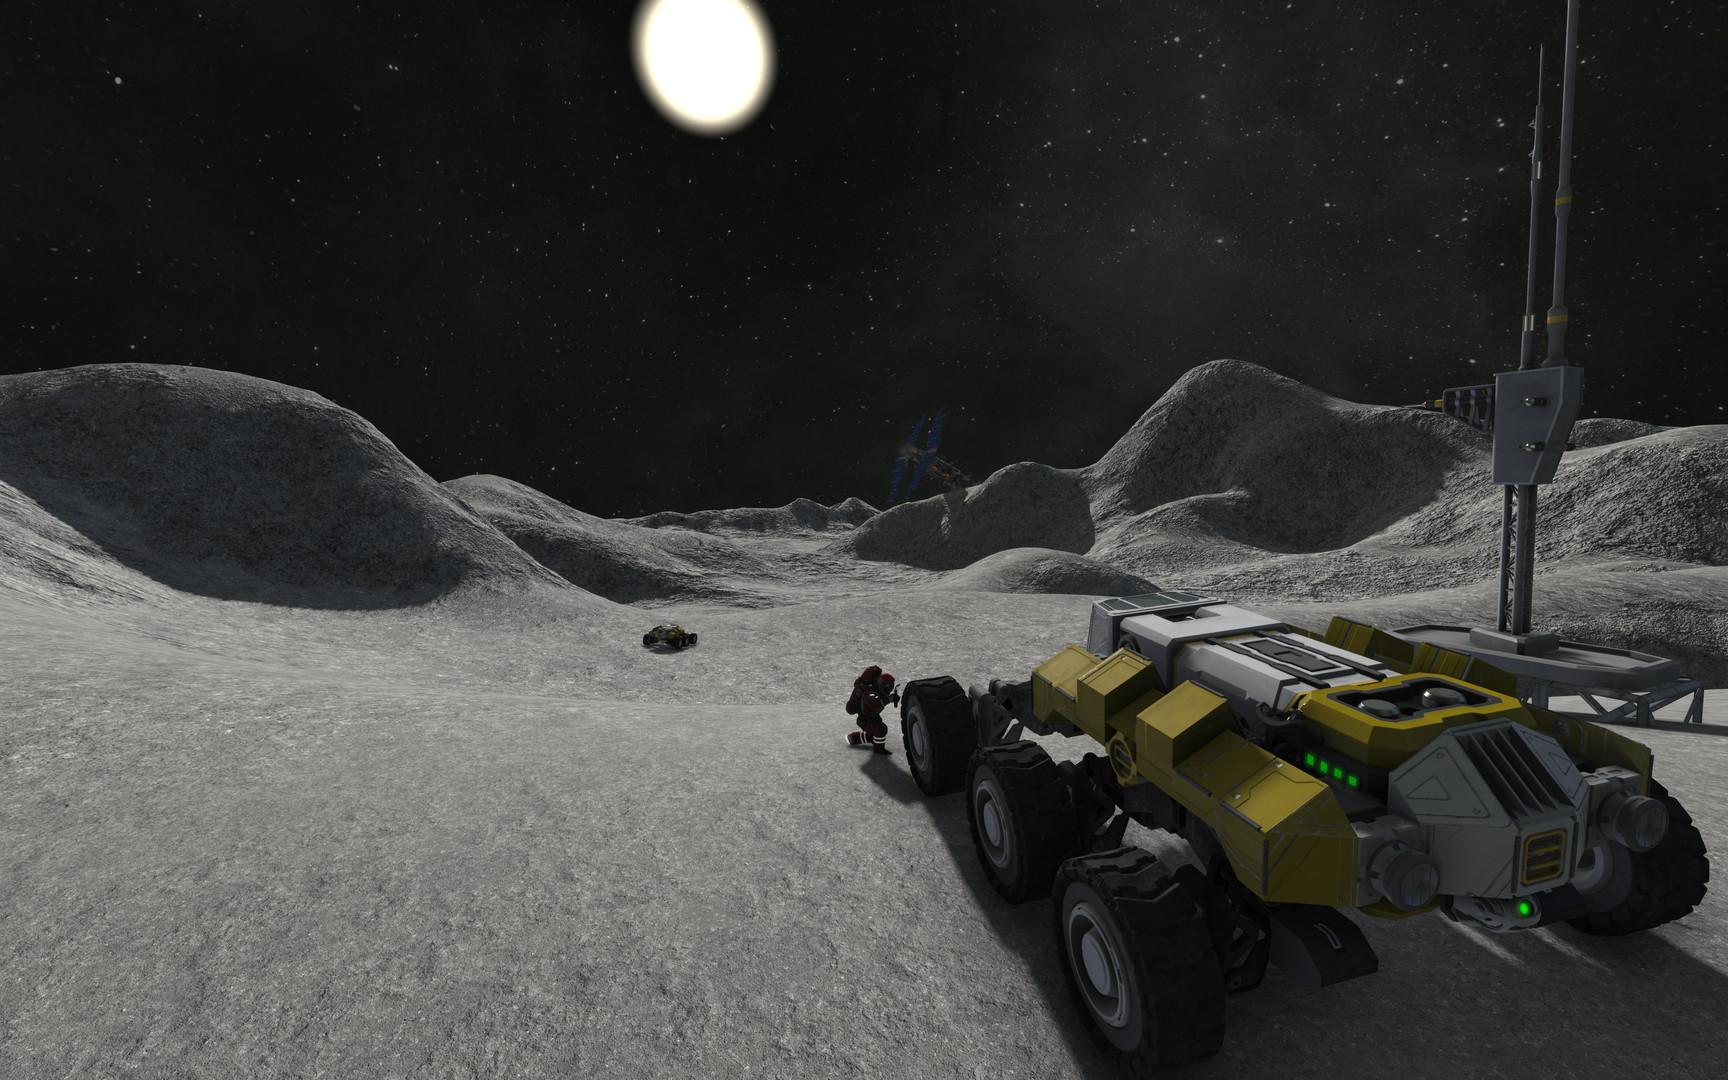 space engineers download kickass.to